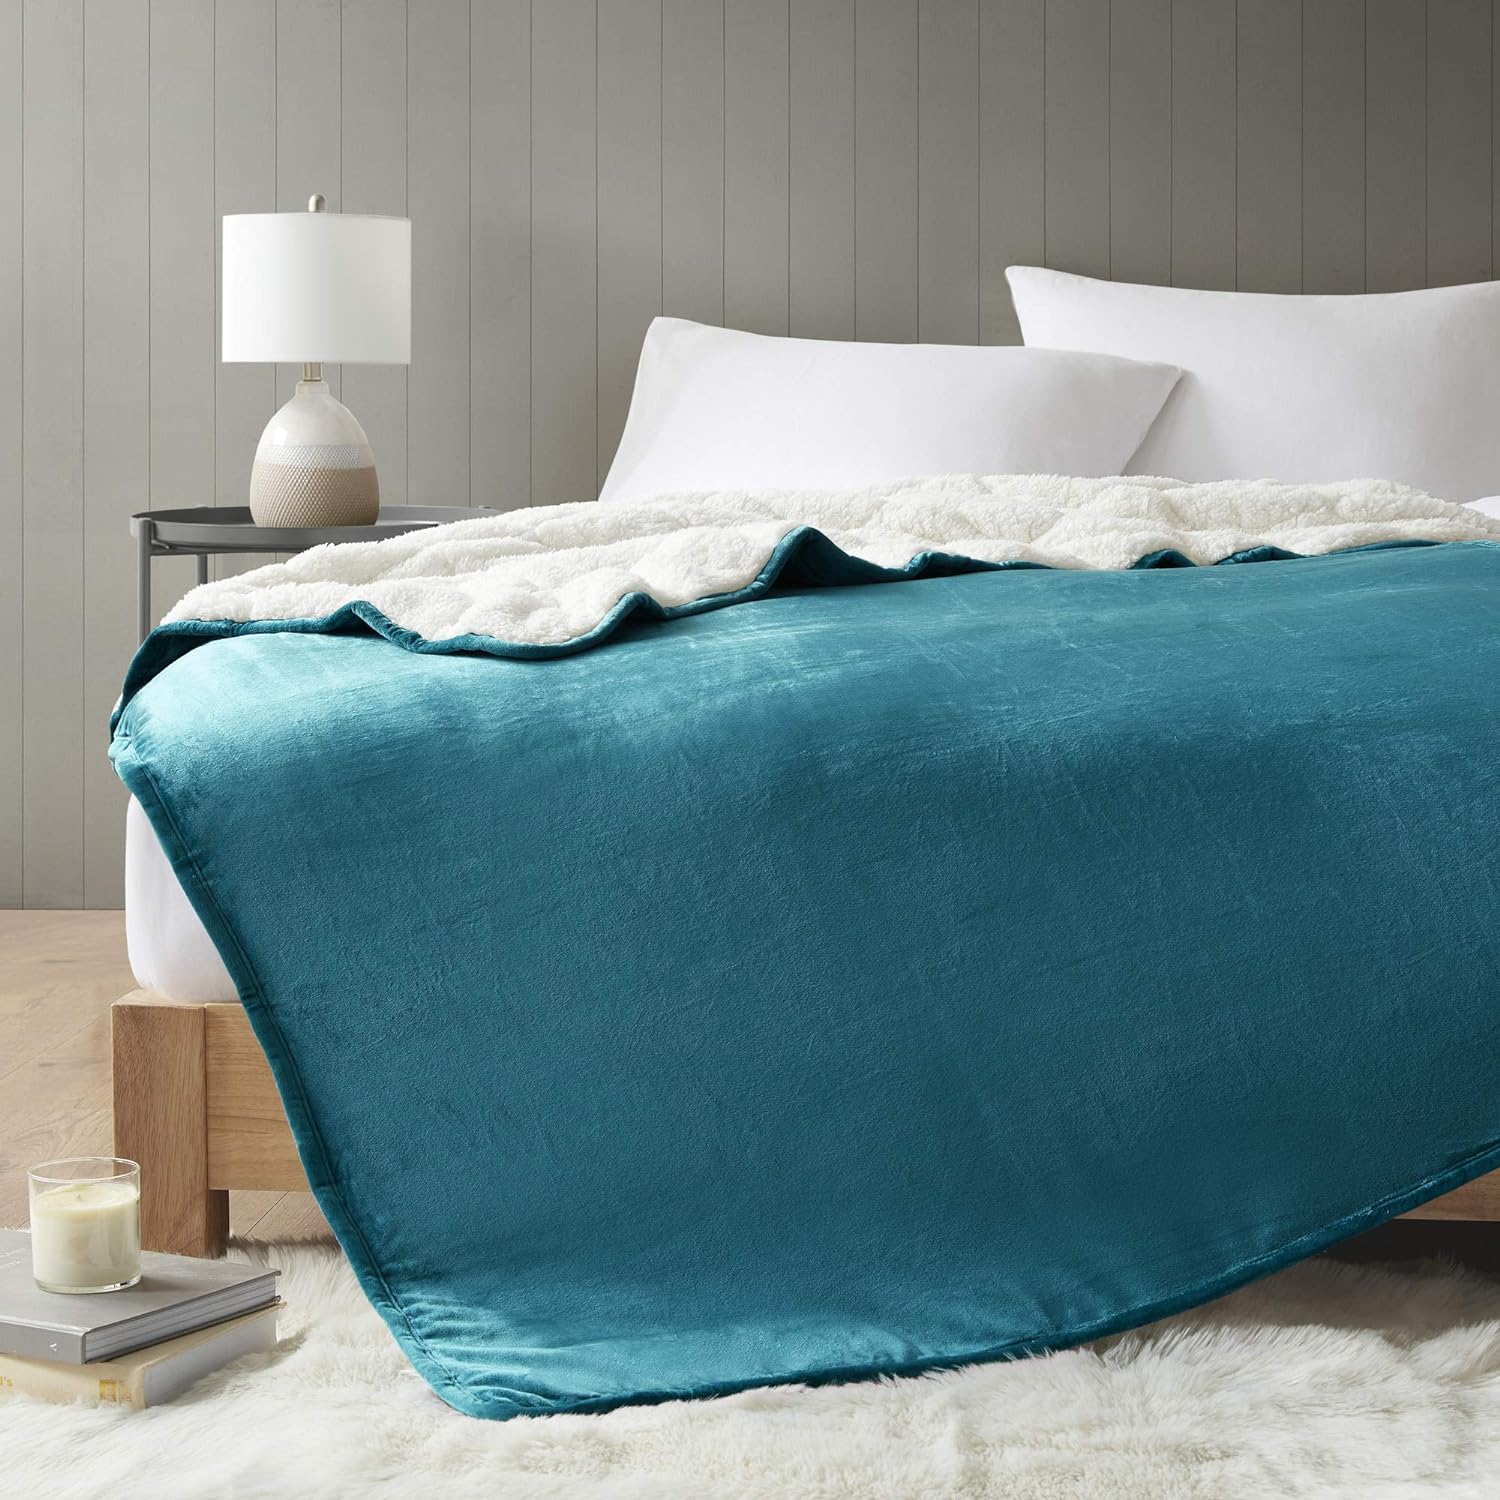 Comfort Spaces Reversible Weighted Blanket Adult-Glass Beads Filling All Season Soft Heavy Wraps-Box Quilted Cozy Warm Bed Cover, 60"x80" / 15lbs, Velvet to Sherpa Teal